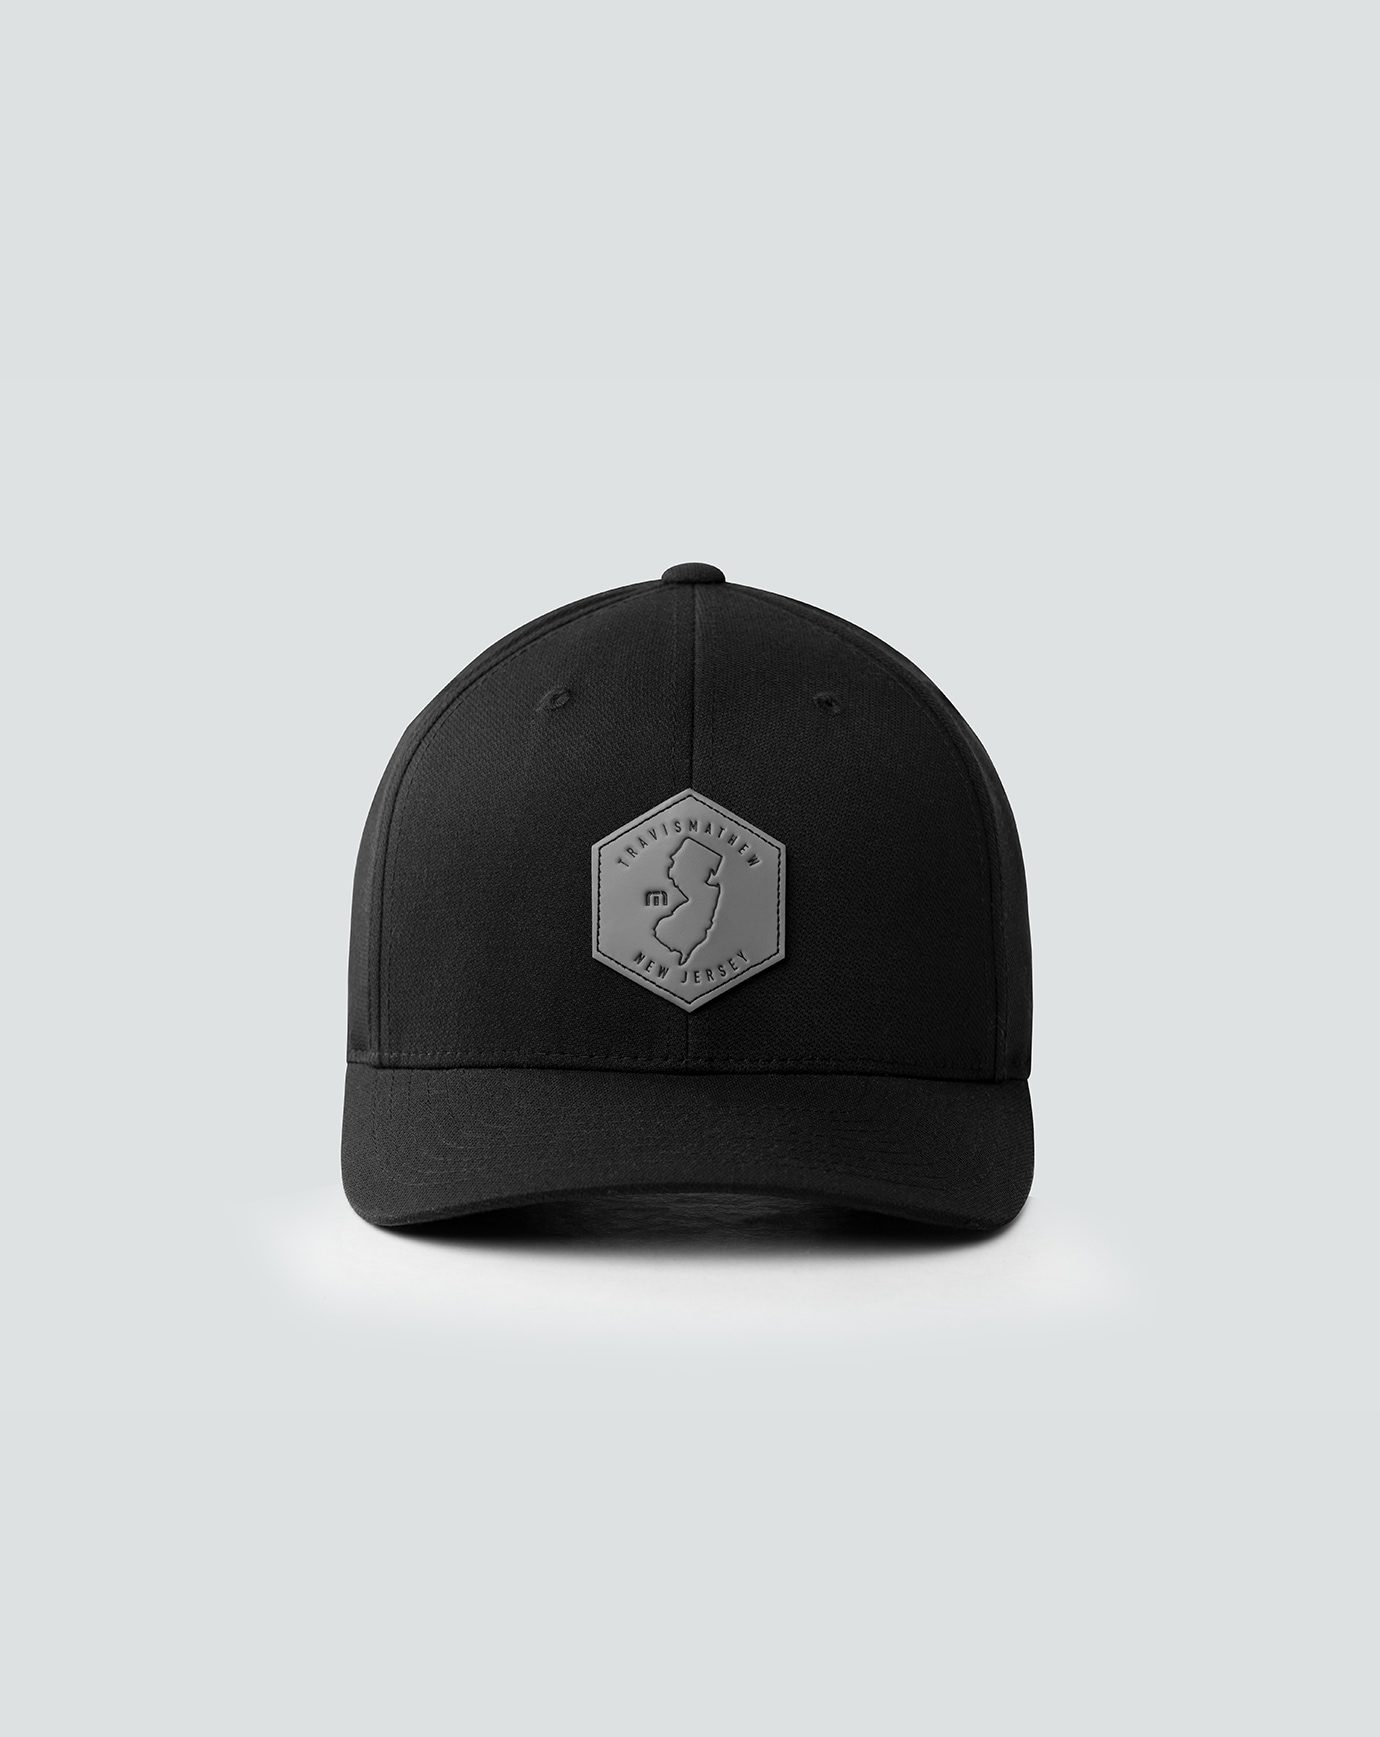 Related Product - BARTENDER SNAPBACK HAT